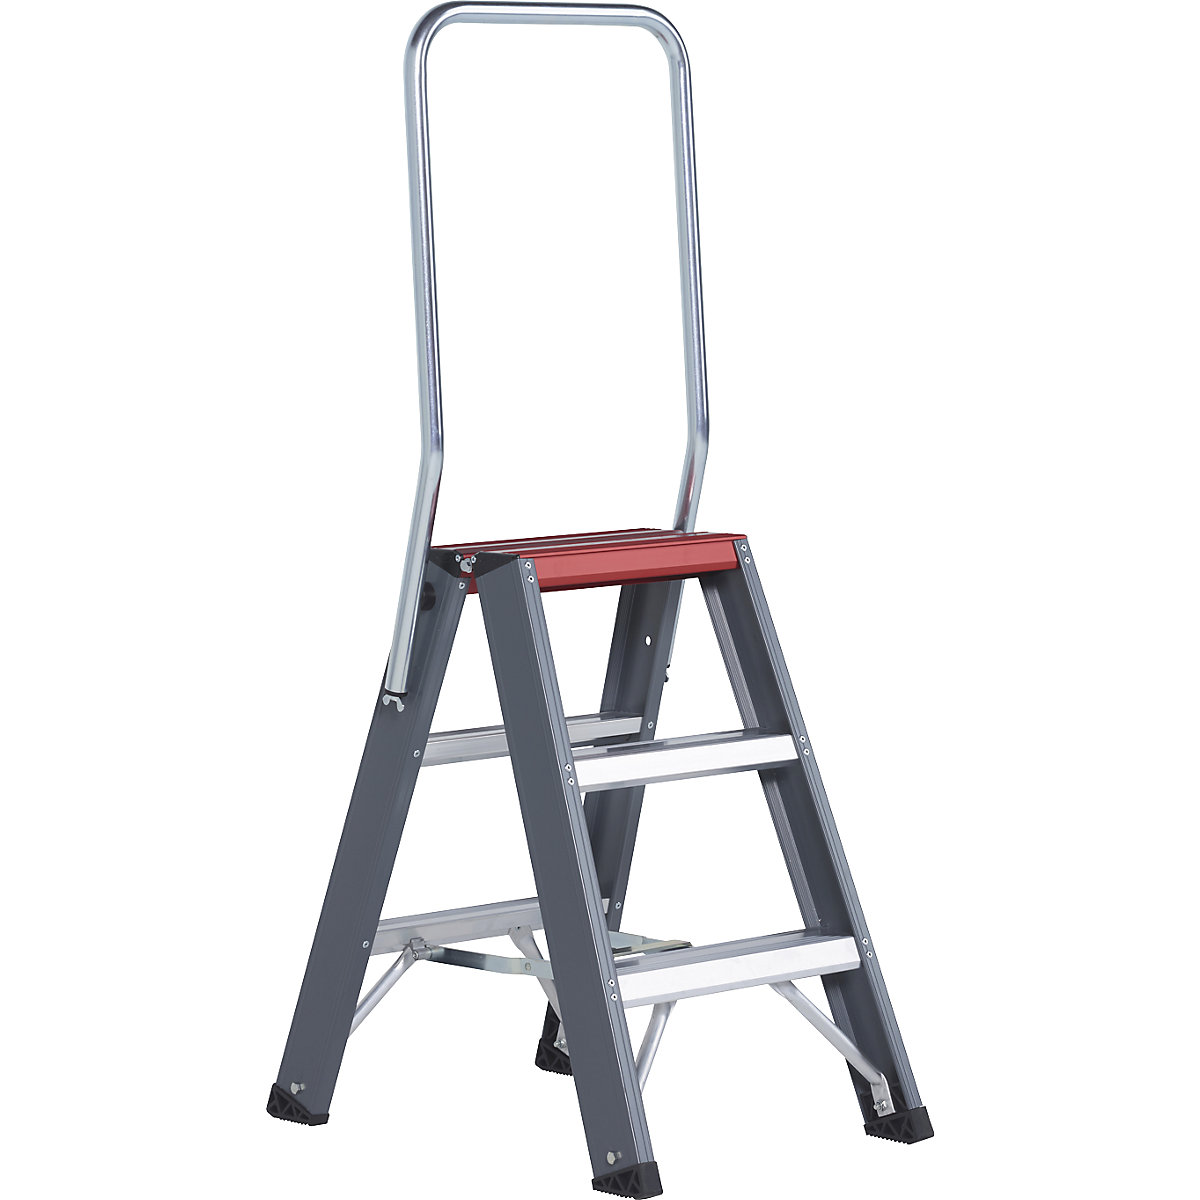 Aluminium step ladder – Altrex, double sided access, 2 x 3 steps, working height 2700 mm-7